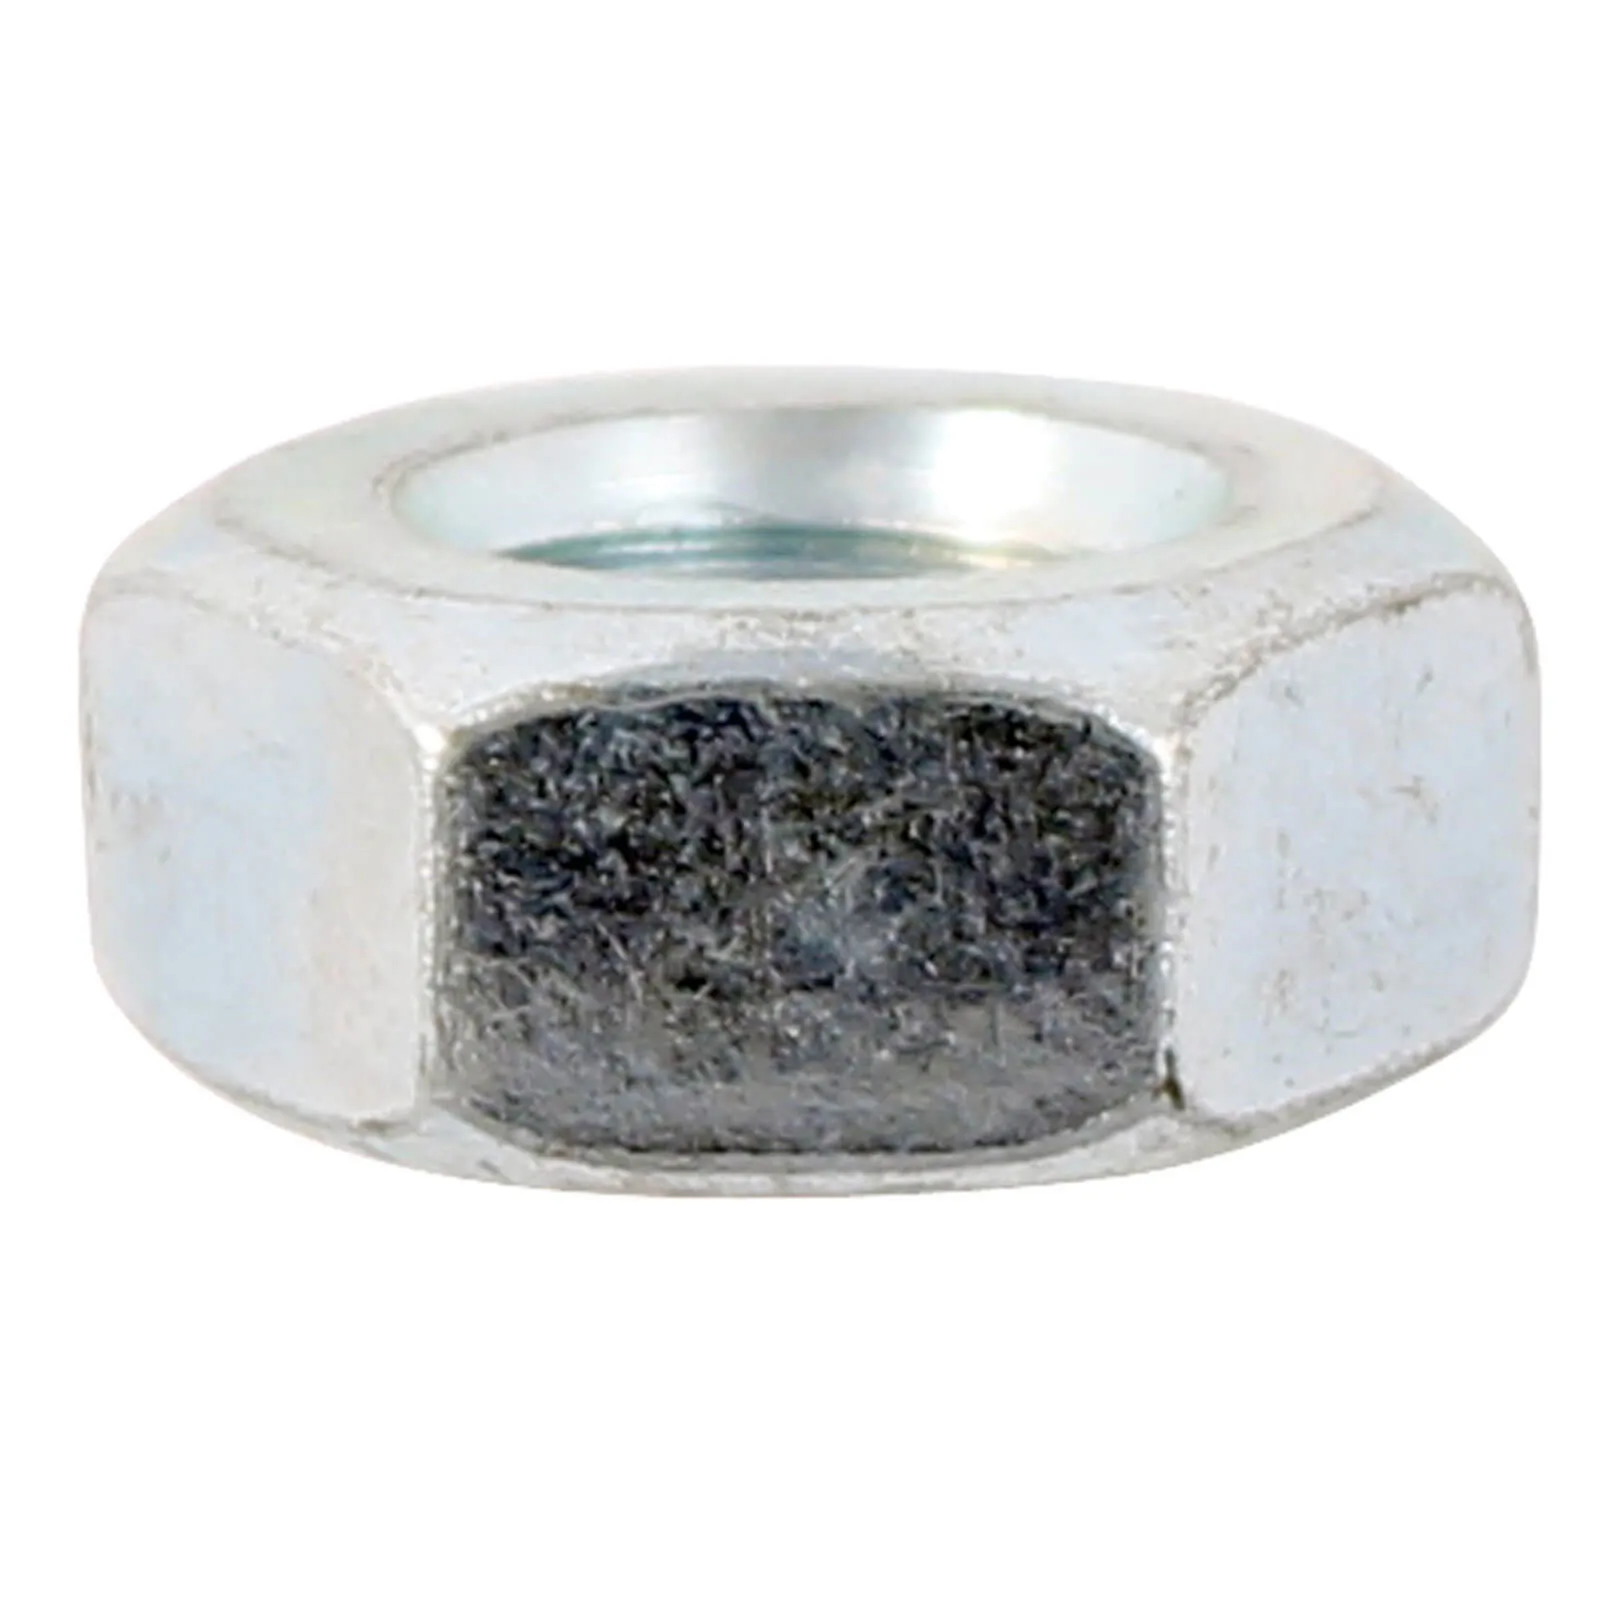 Sirius A4 316 Hex Full Nut Stainless Steel - M2